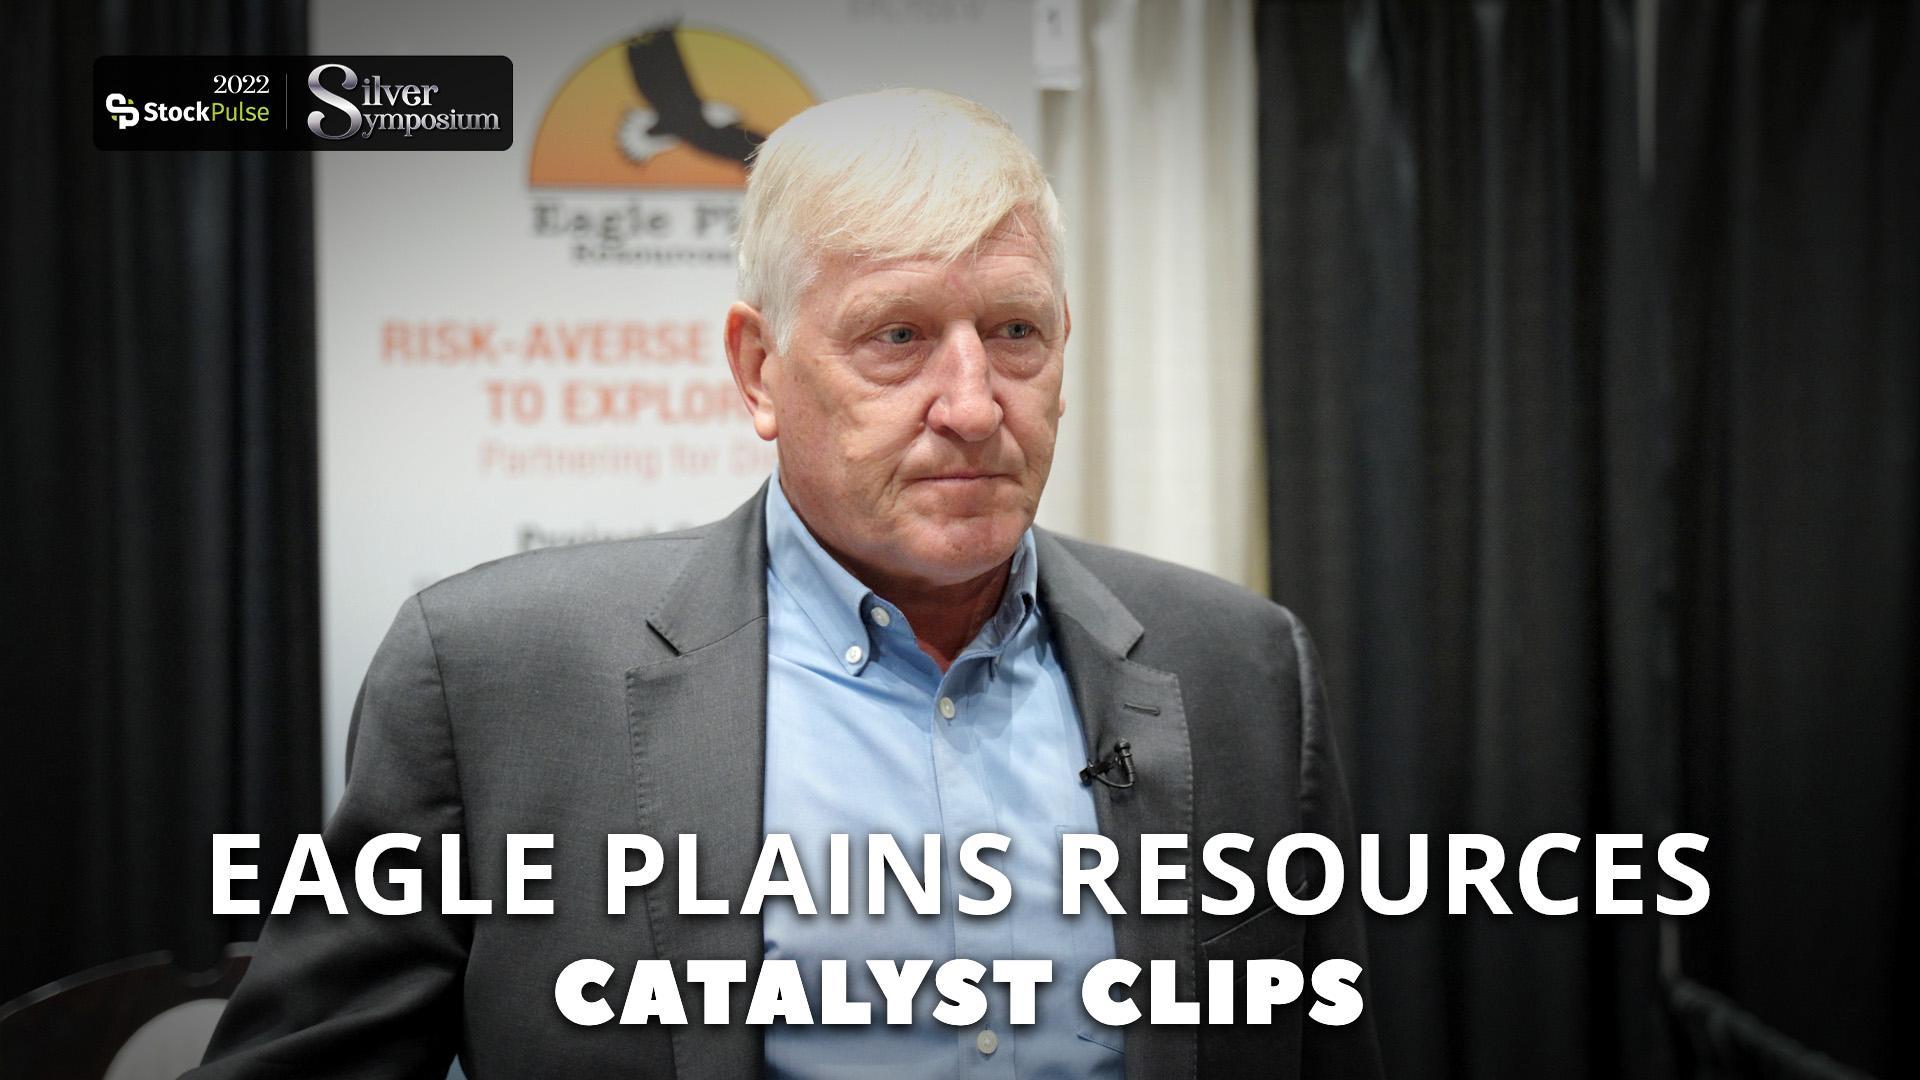 Catalyst Clips | Tim Termuende of Eagle Plains Resources